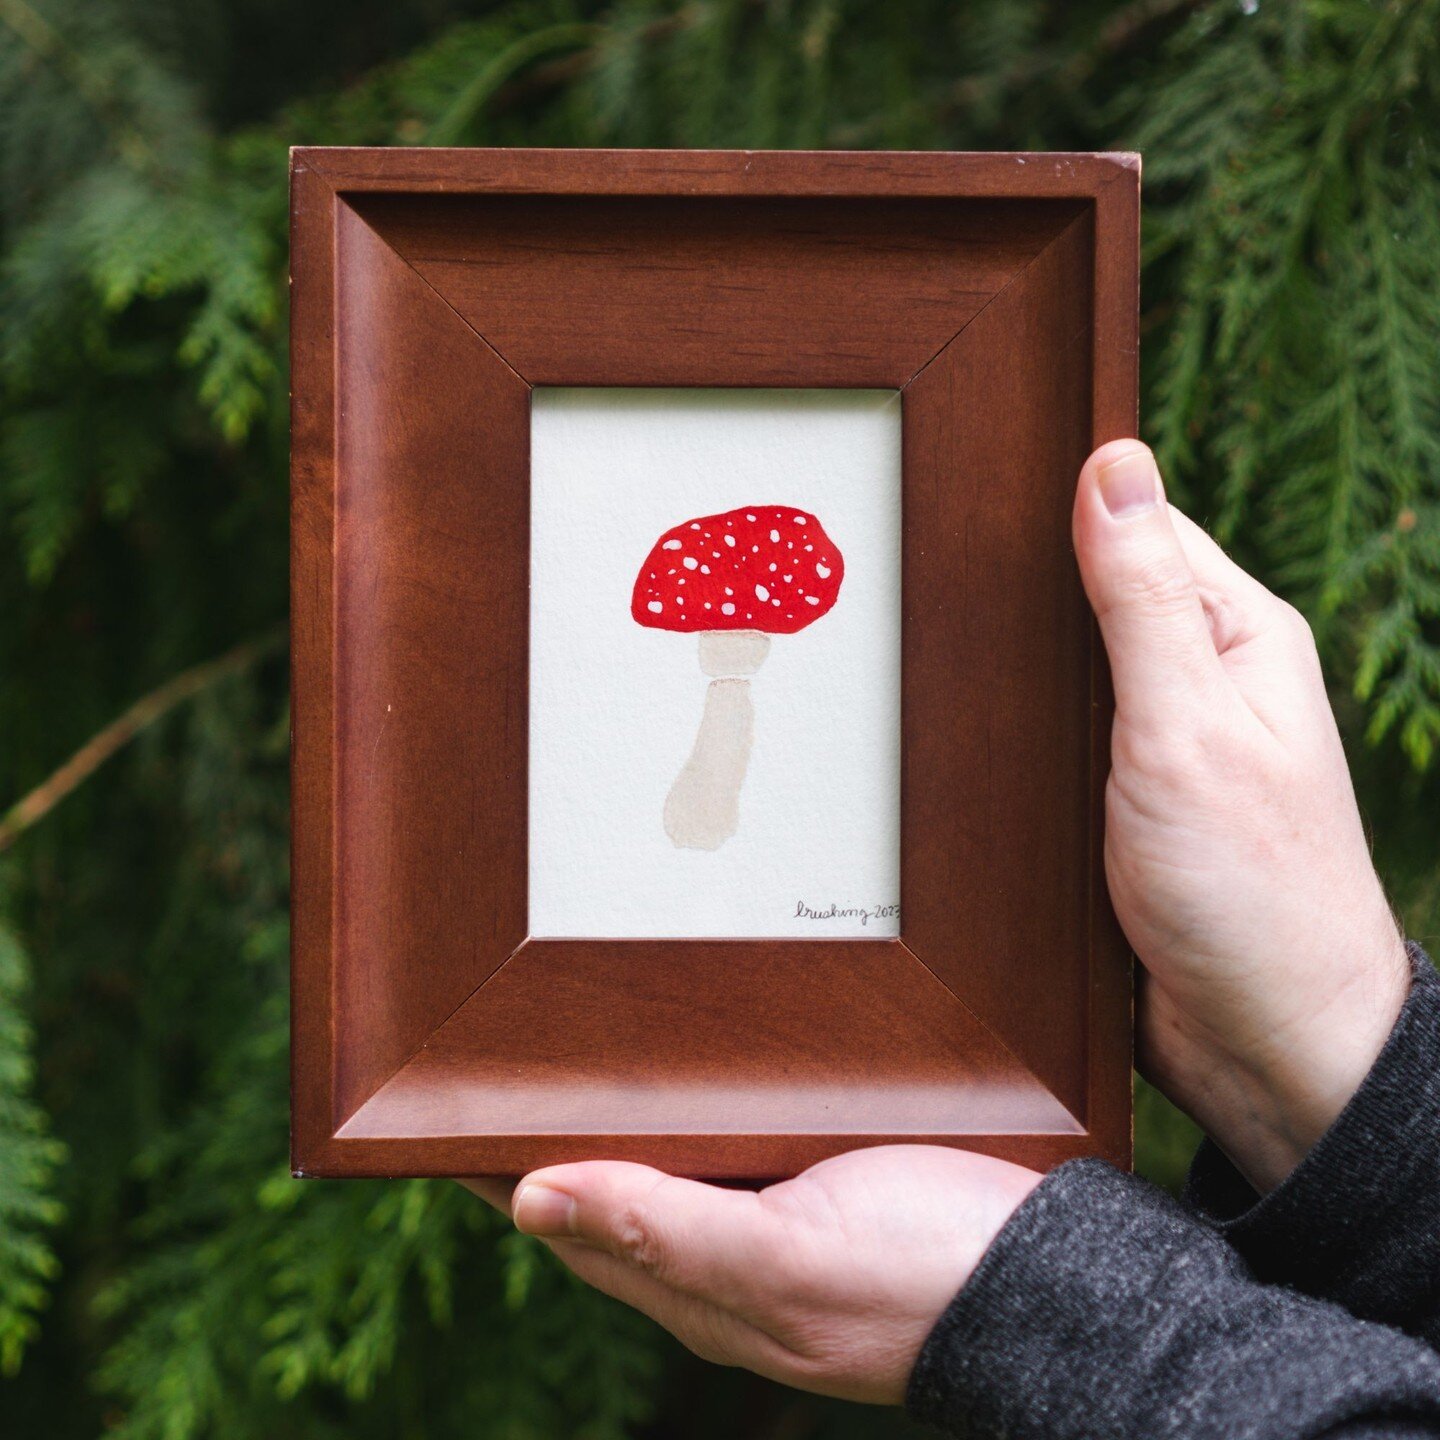 Is Mushroom Monday a thing? 🍄

This is my first tiny mushroom painting in a thrifted frame. I have several more in the works. Stay tuned. 👀